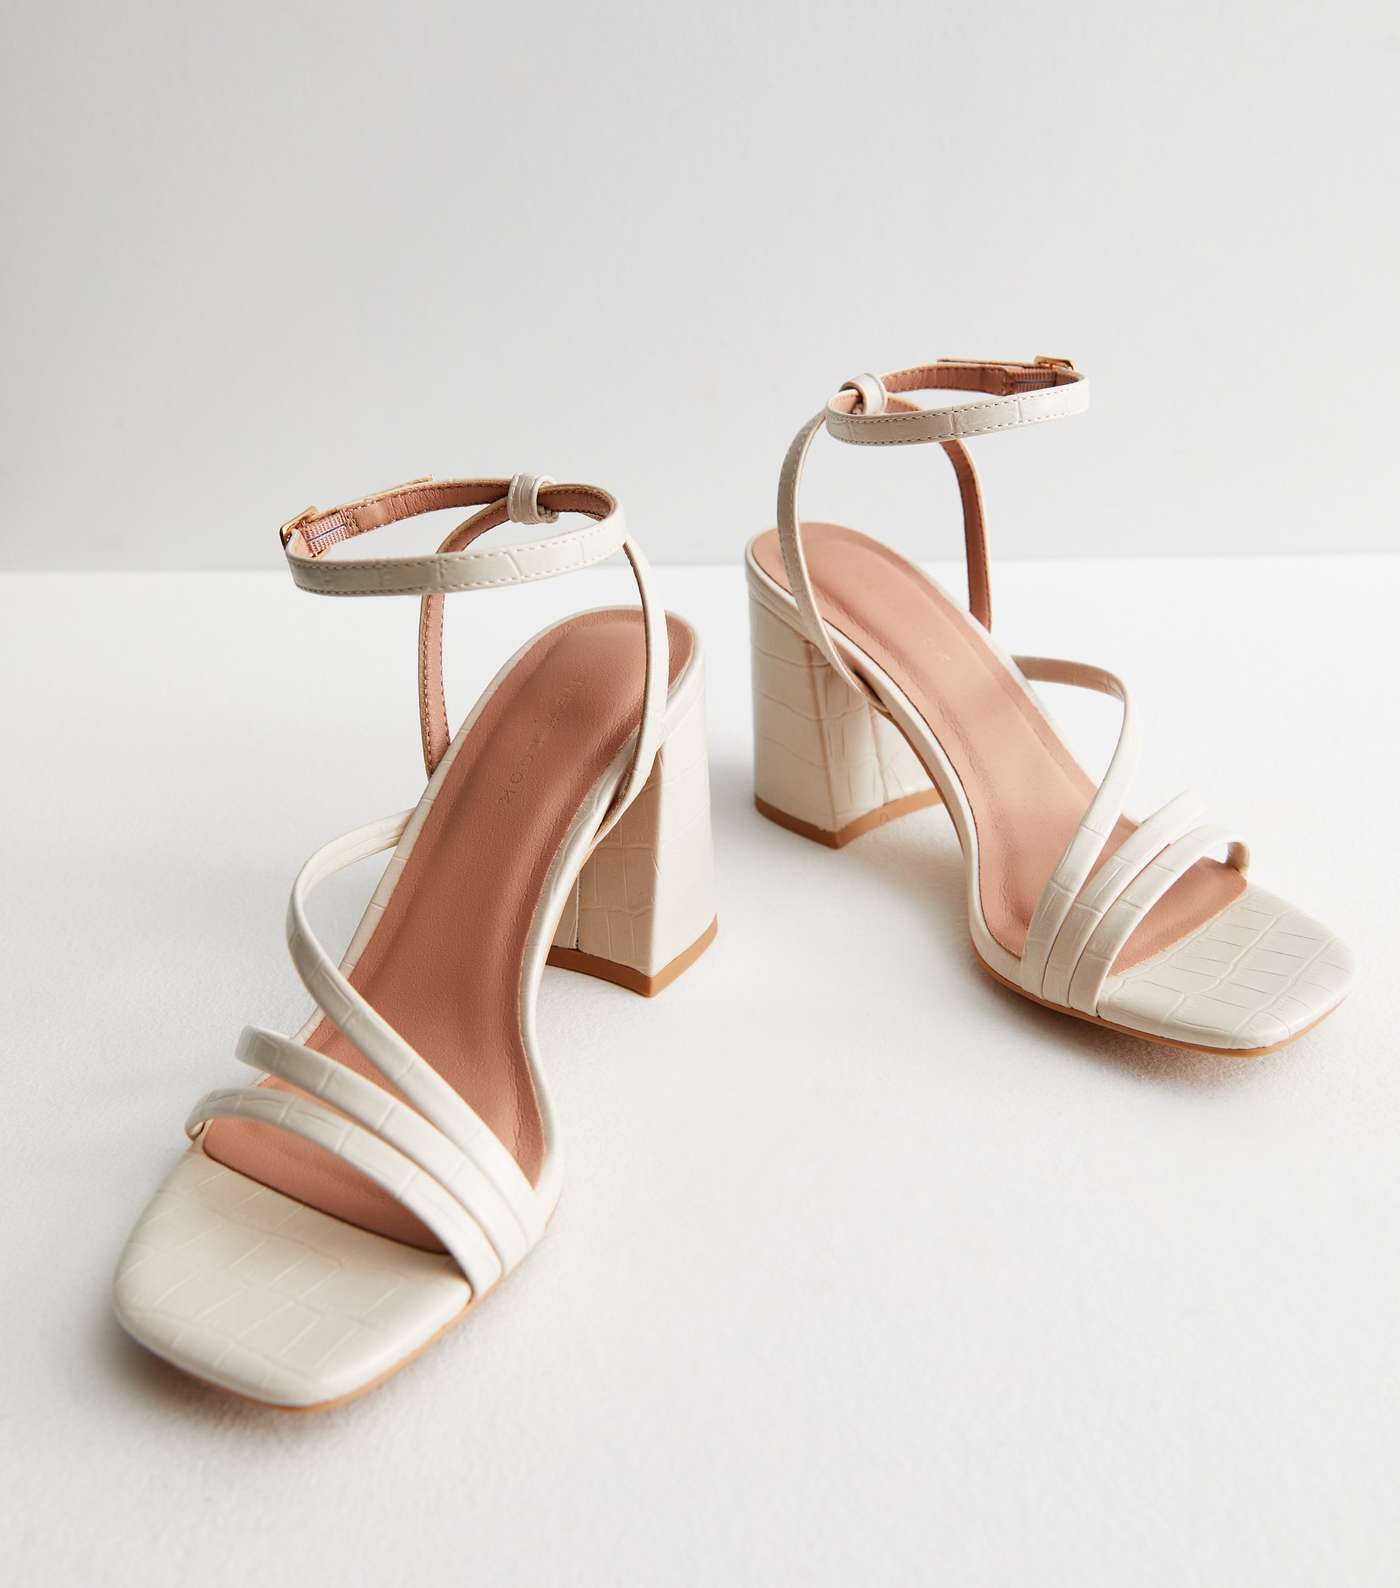 Off White Leather-Look Strappy Block Heel Sandals Image 3